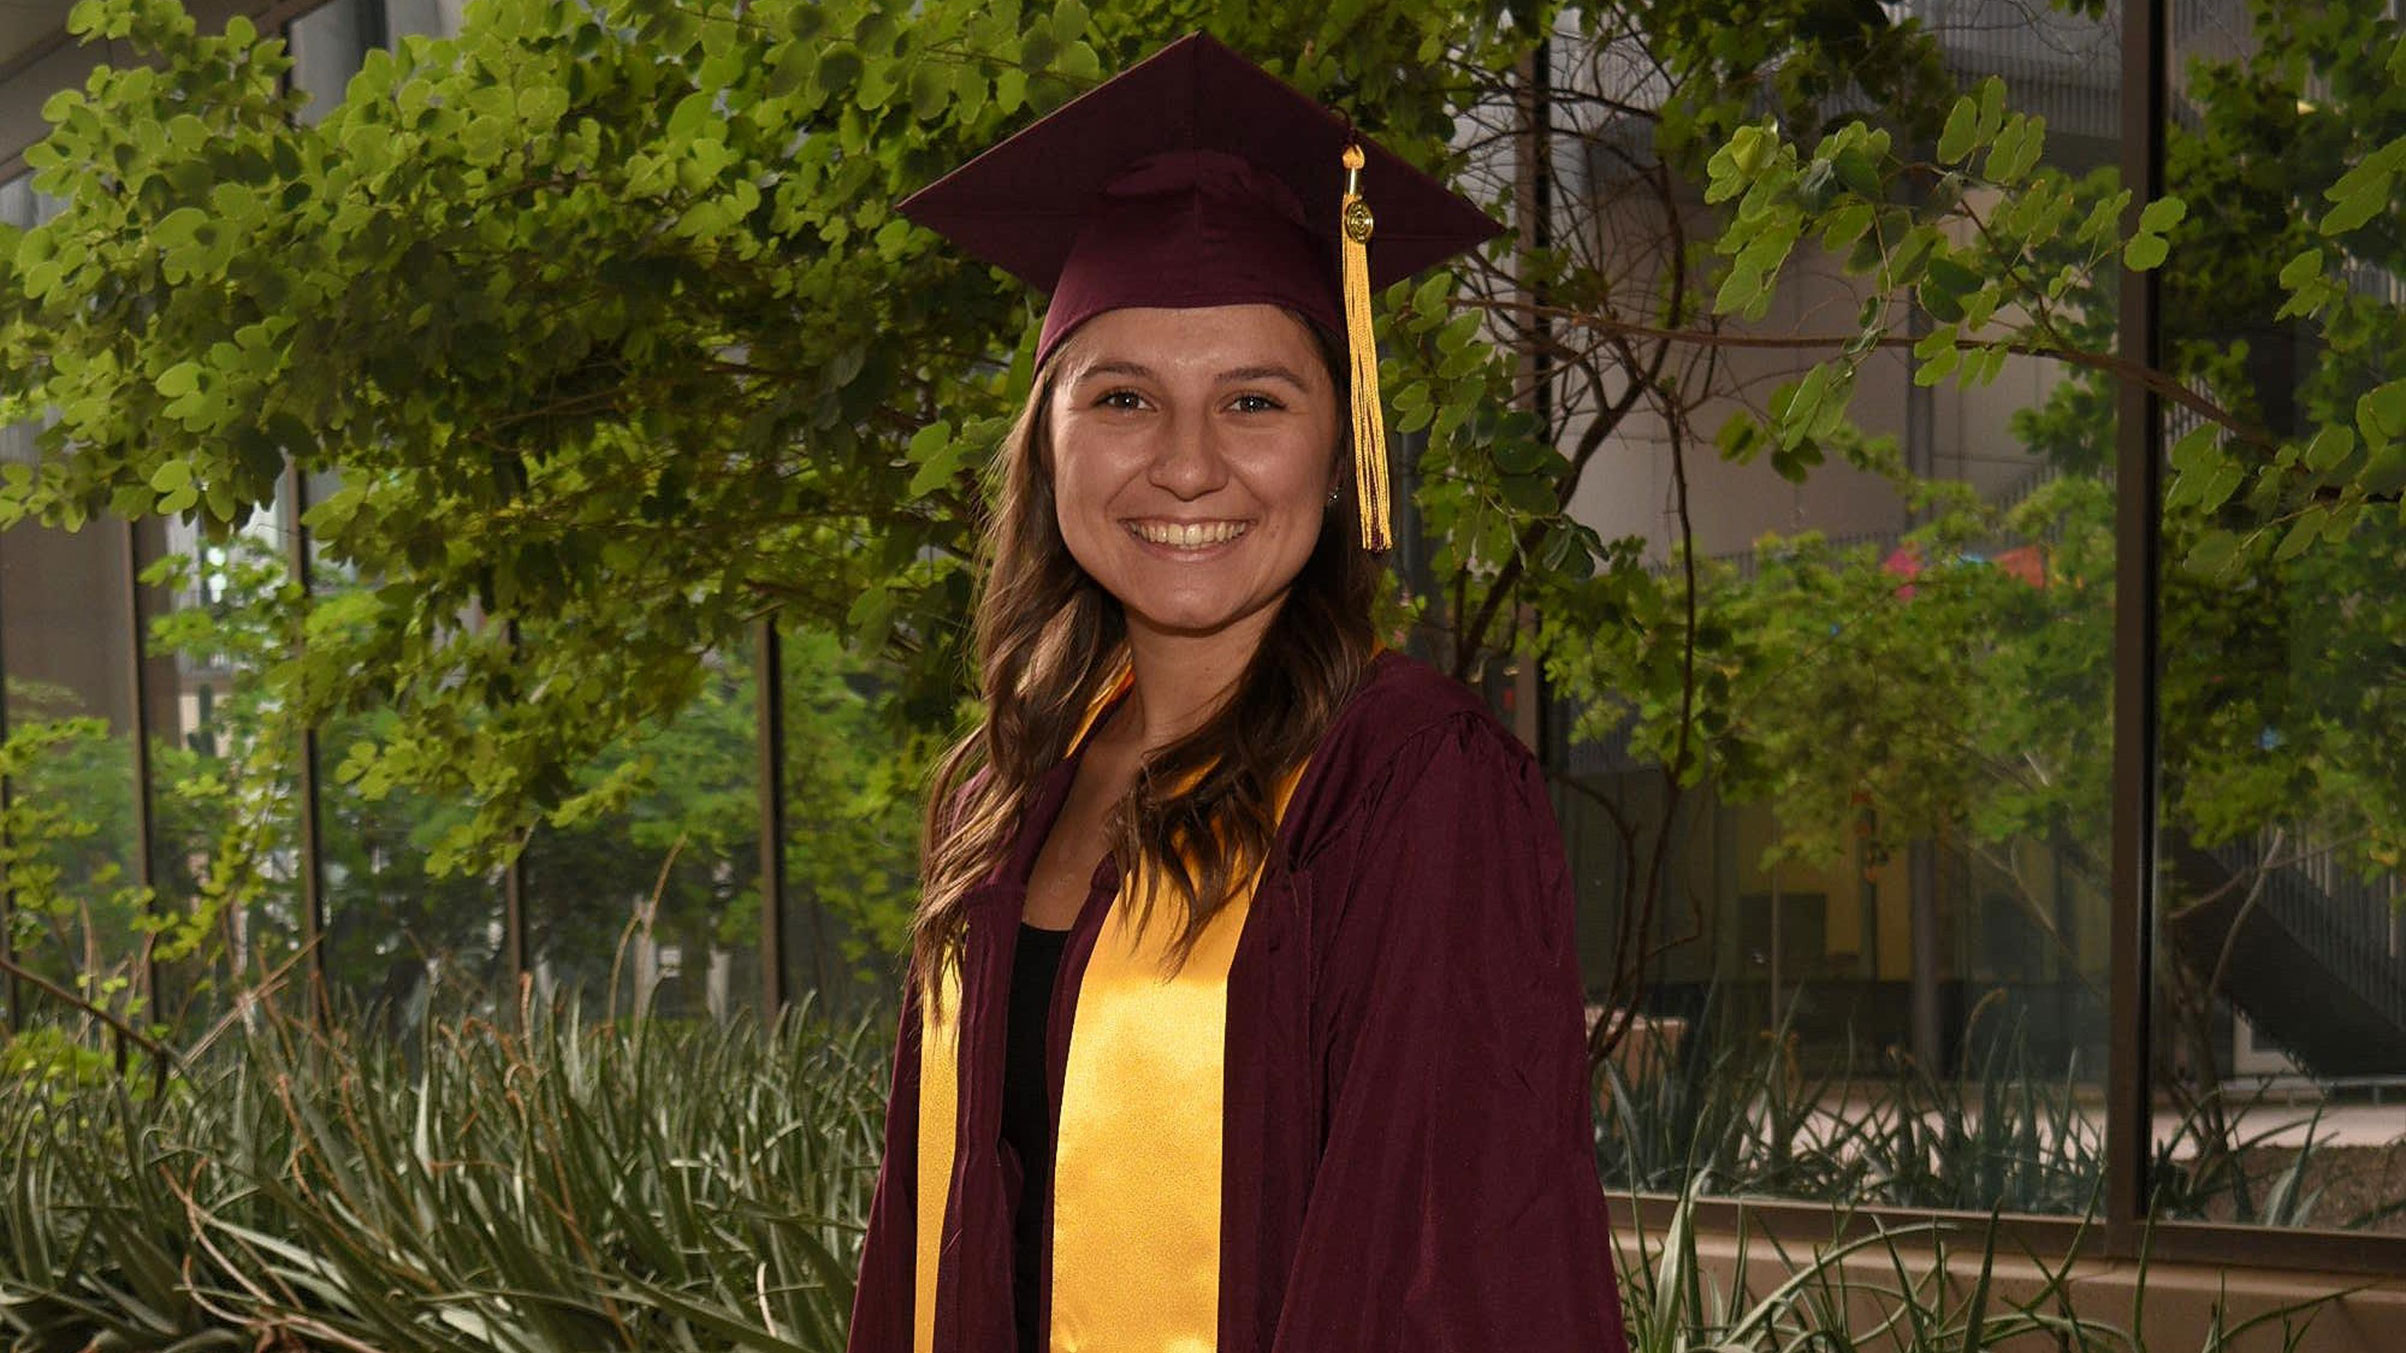 Honors graduate Sarah Lopez poses for a photo in her graduation cap and gown